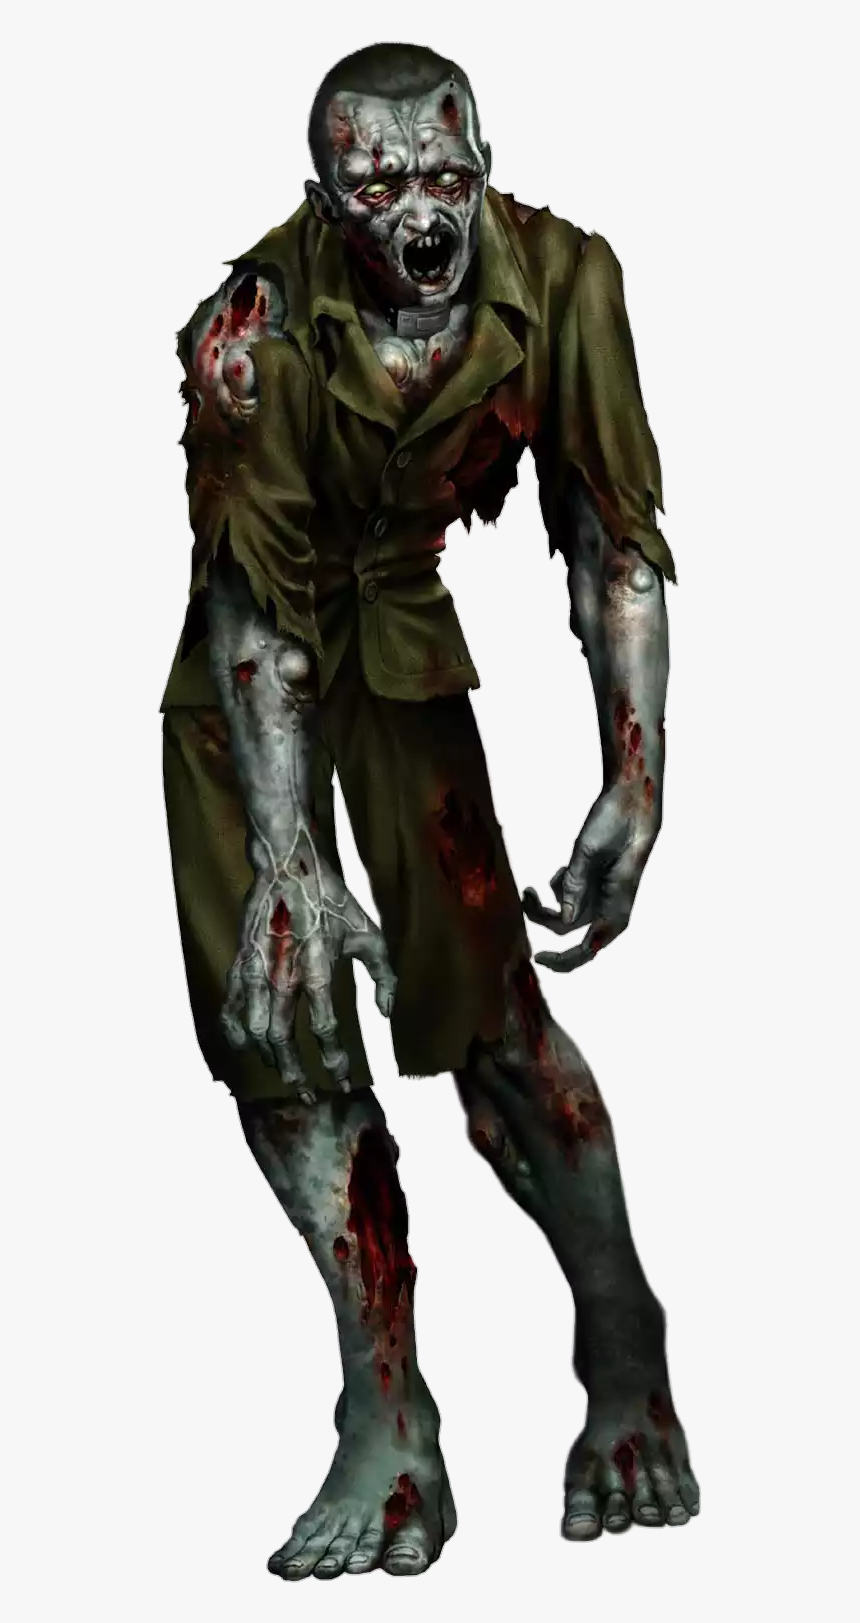 Zombie Png Image, Transparent Png, Free Download